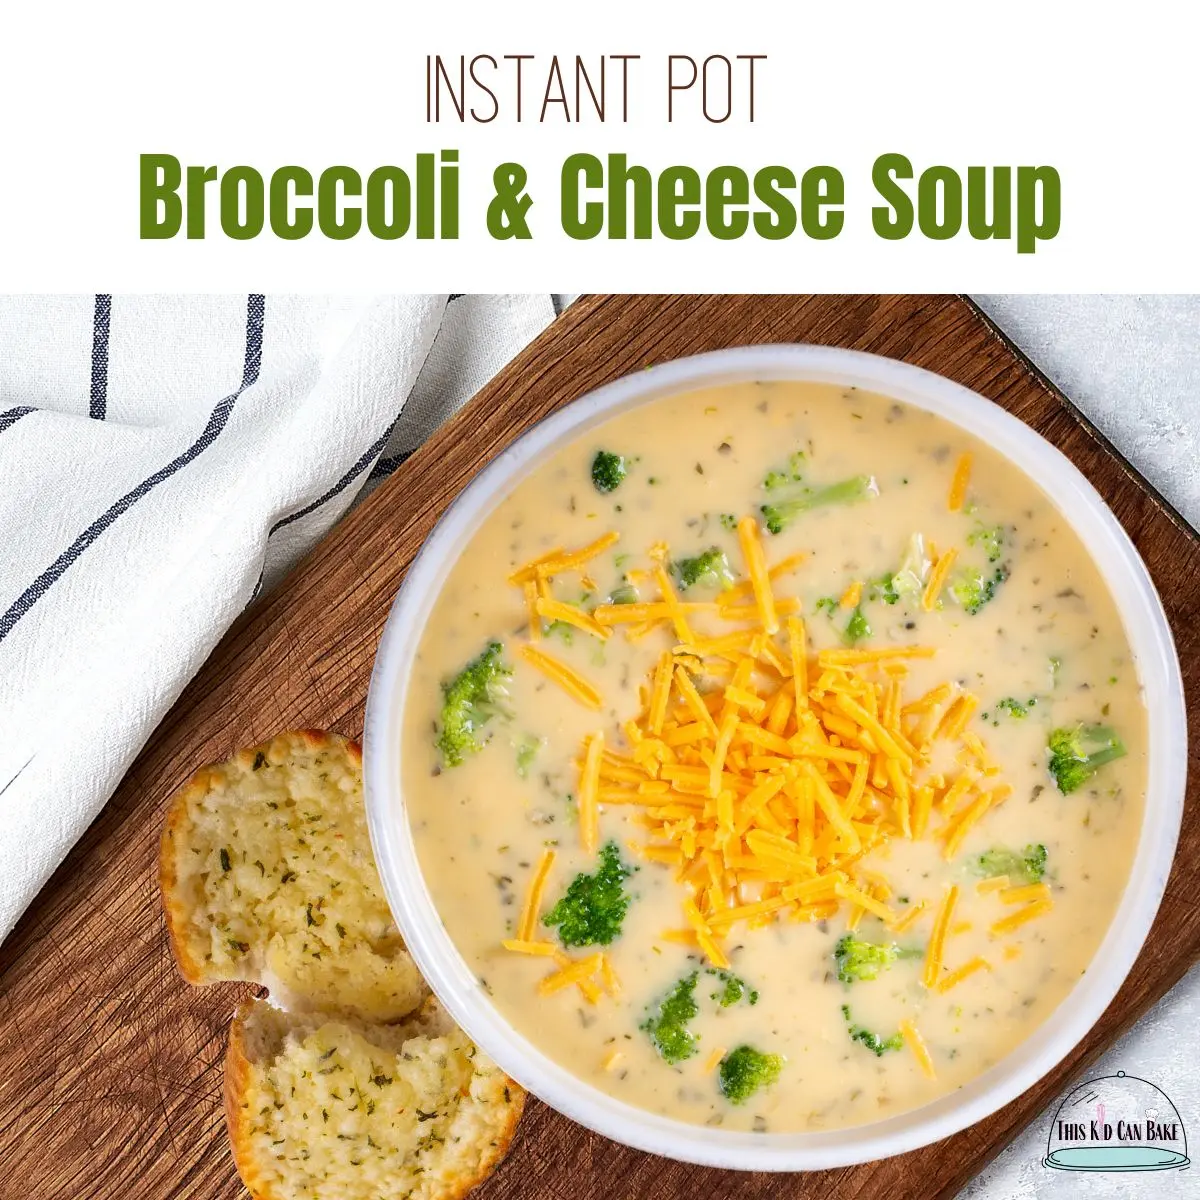 A picture of broccoli and cheese soup in a white bowl on a cutting board with a striped towel and a piece of garlic bread.